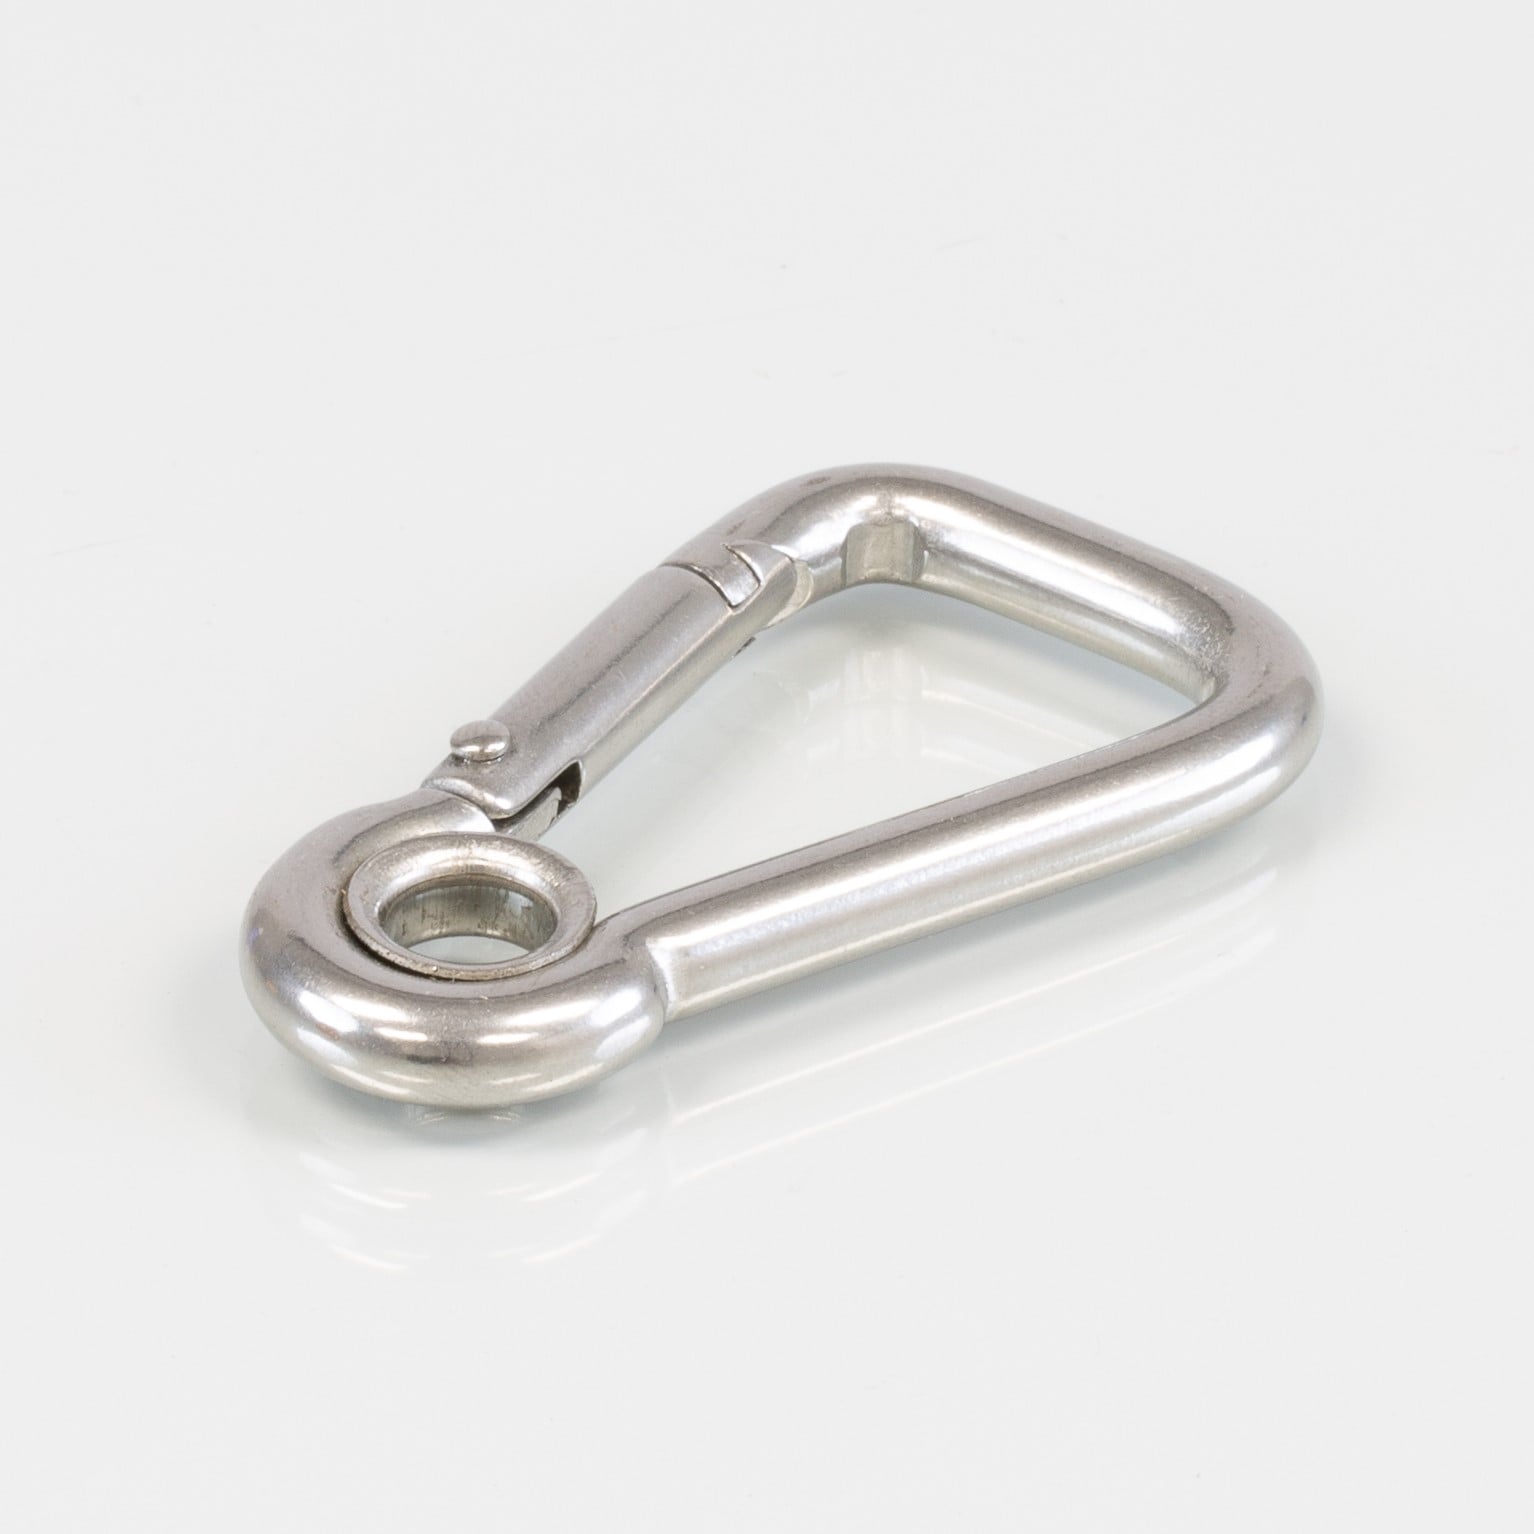 Hooks - Just Stainless